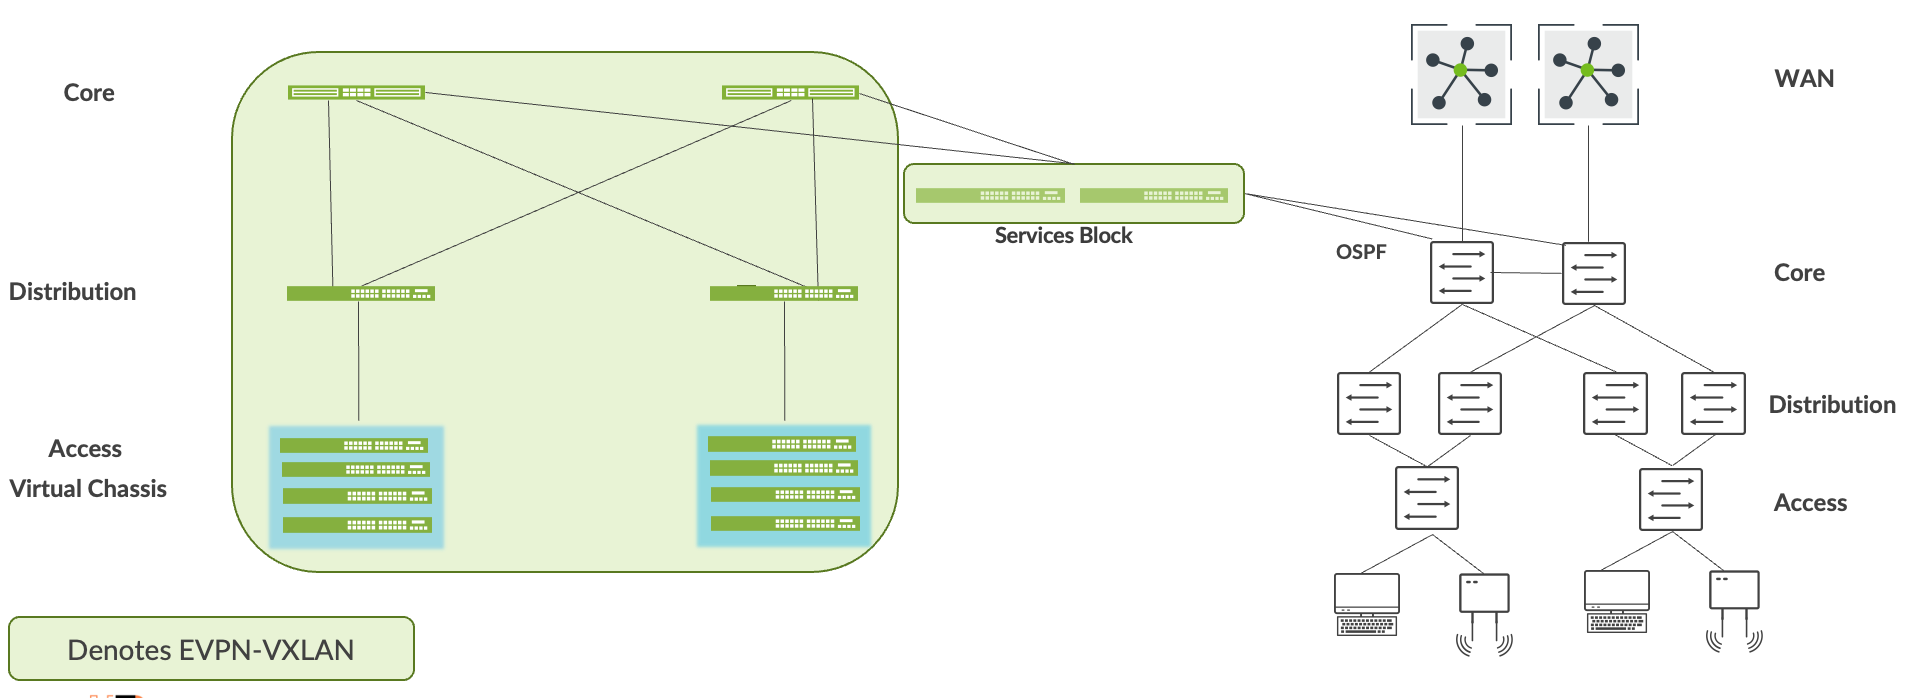 Services Block Interconnects with the Core Using OSPF